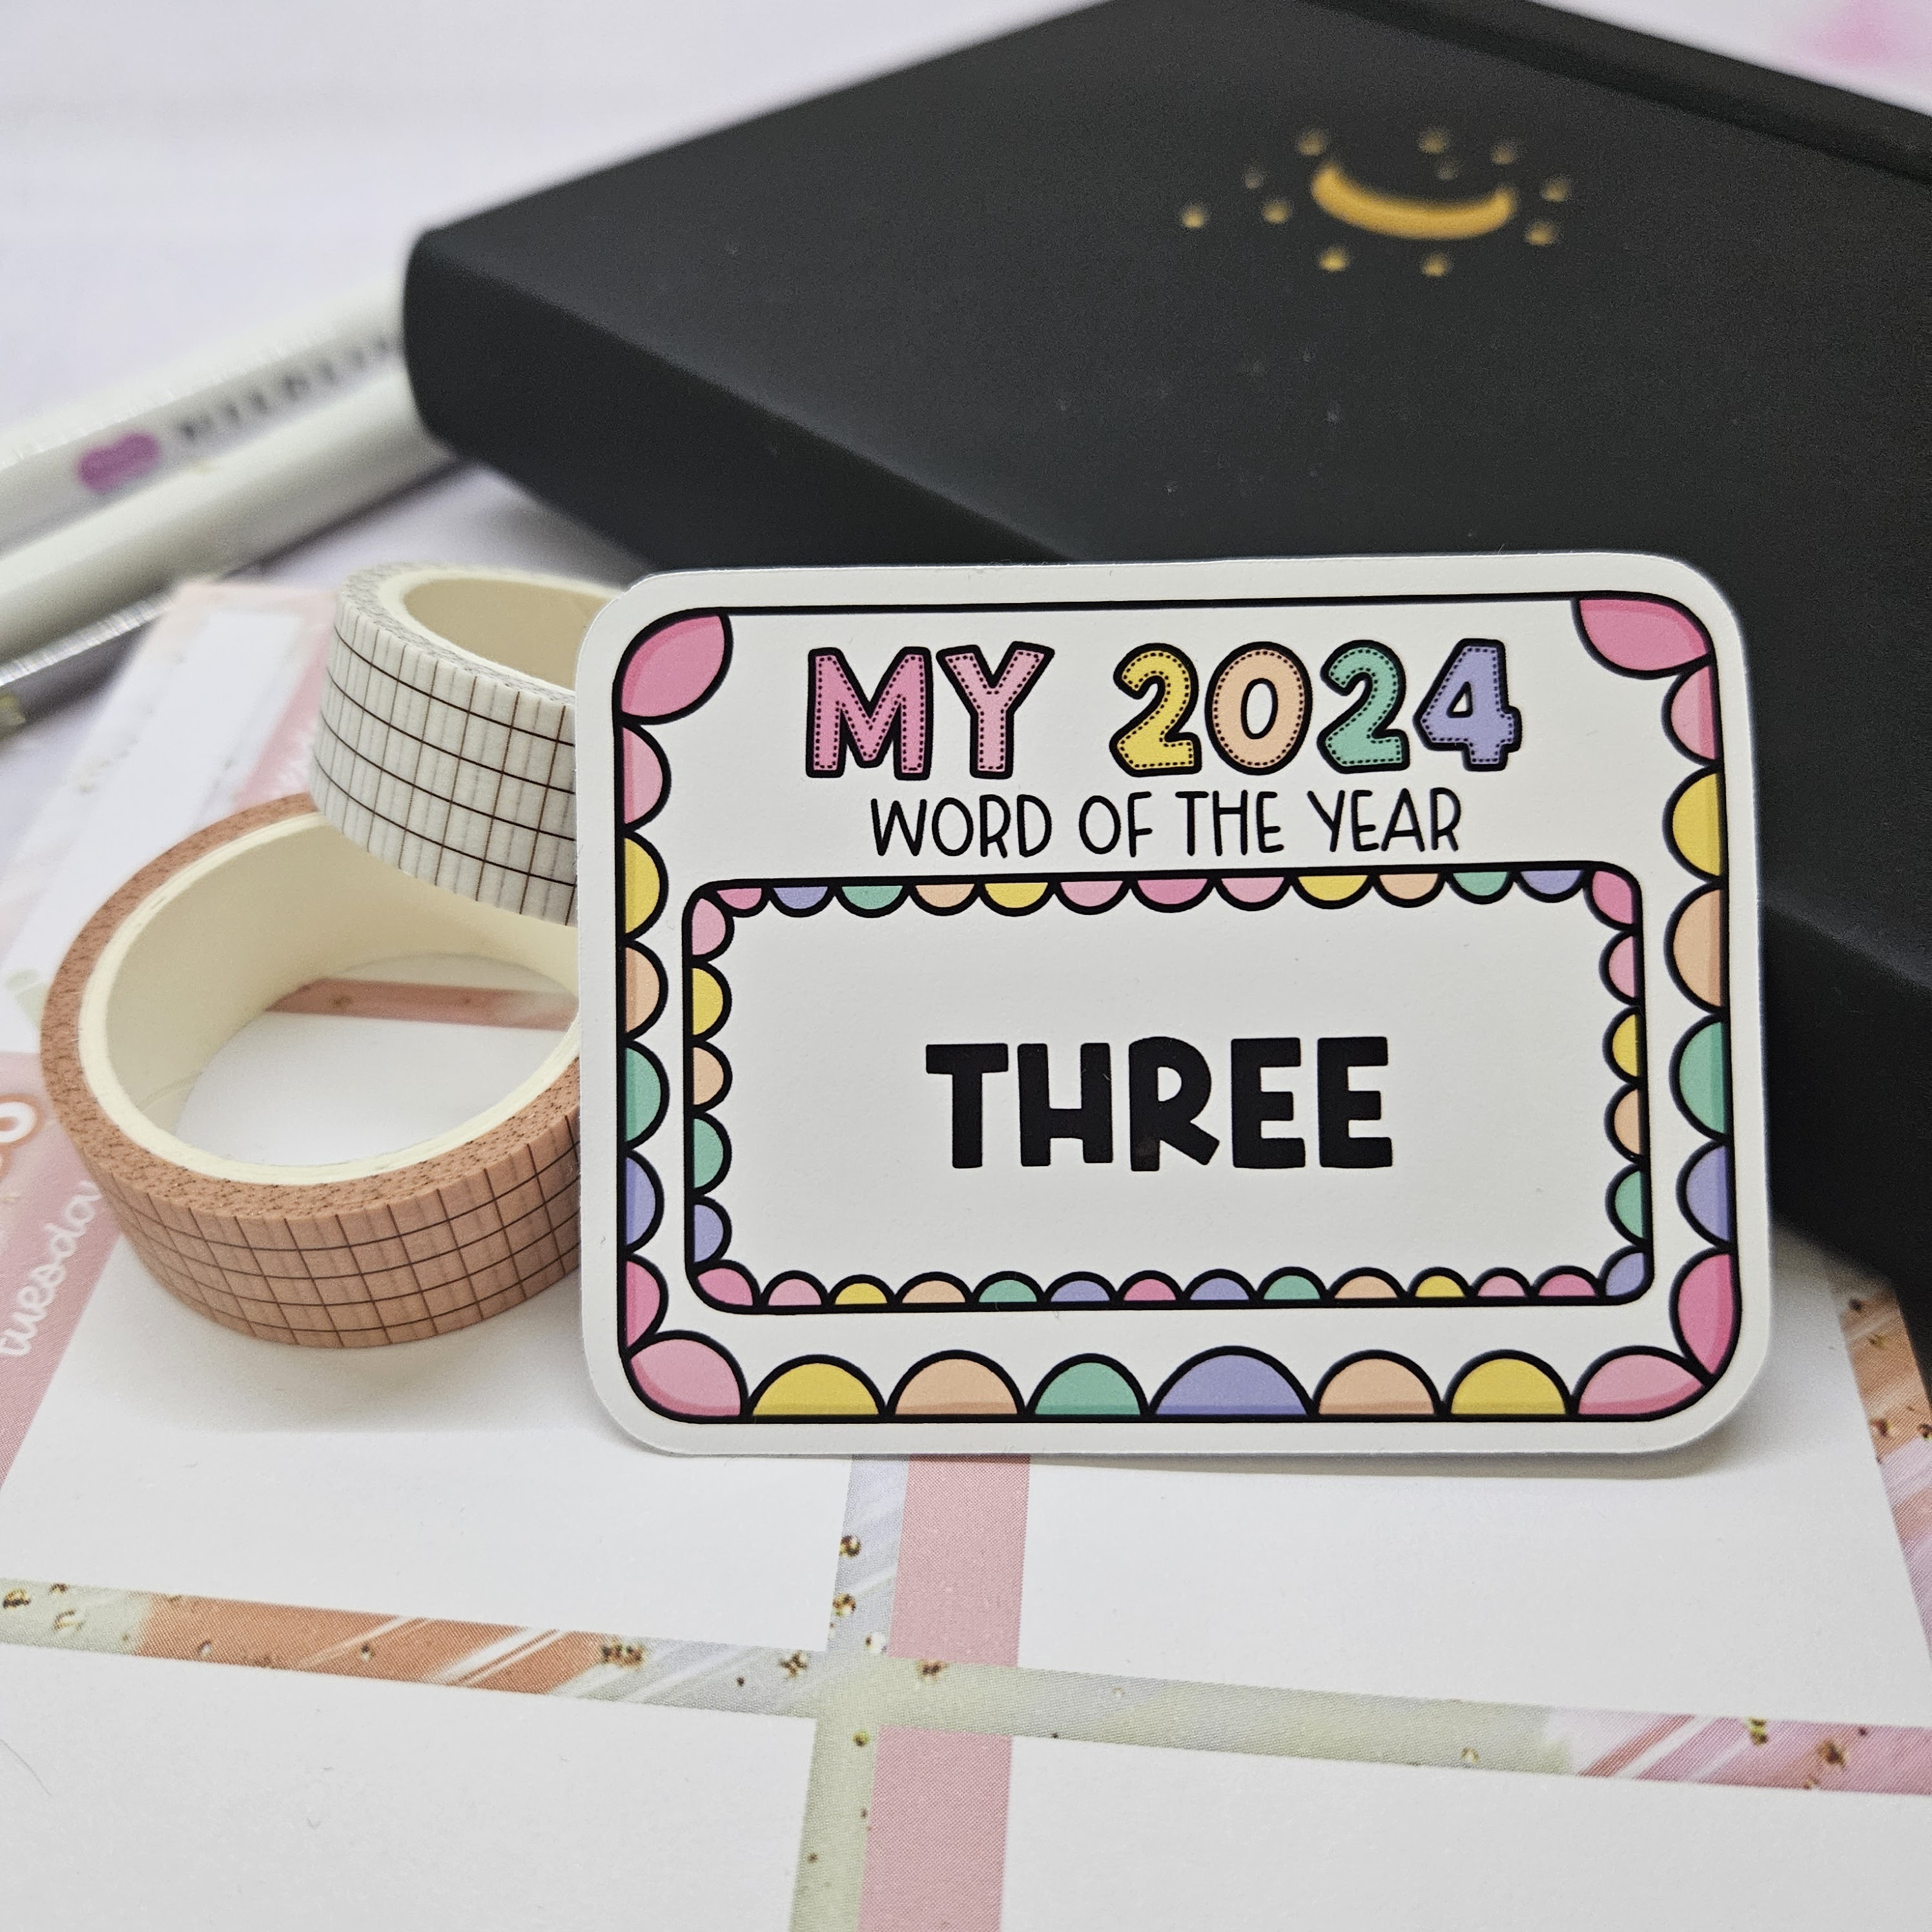 Image shows a sticker of the word of the year "three" with a black bullet journal underneath it and a notepad. There are also two pens and two washi tapes in the photo.